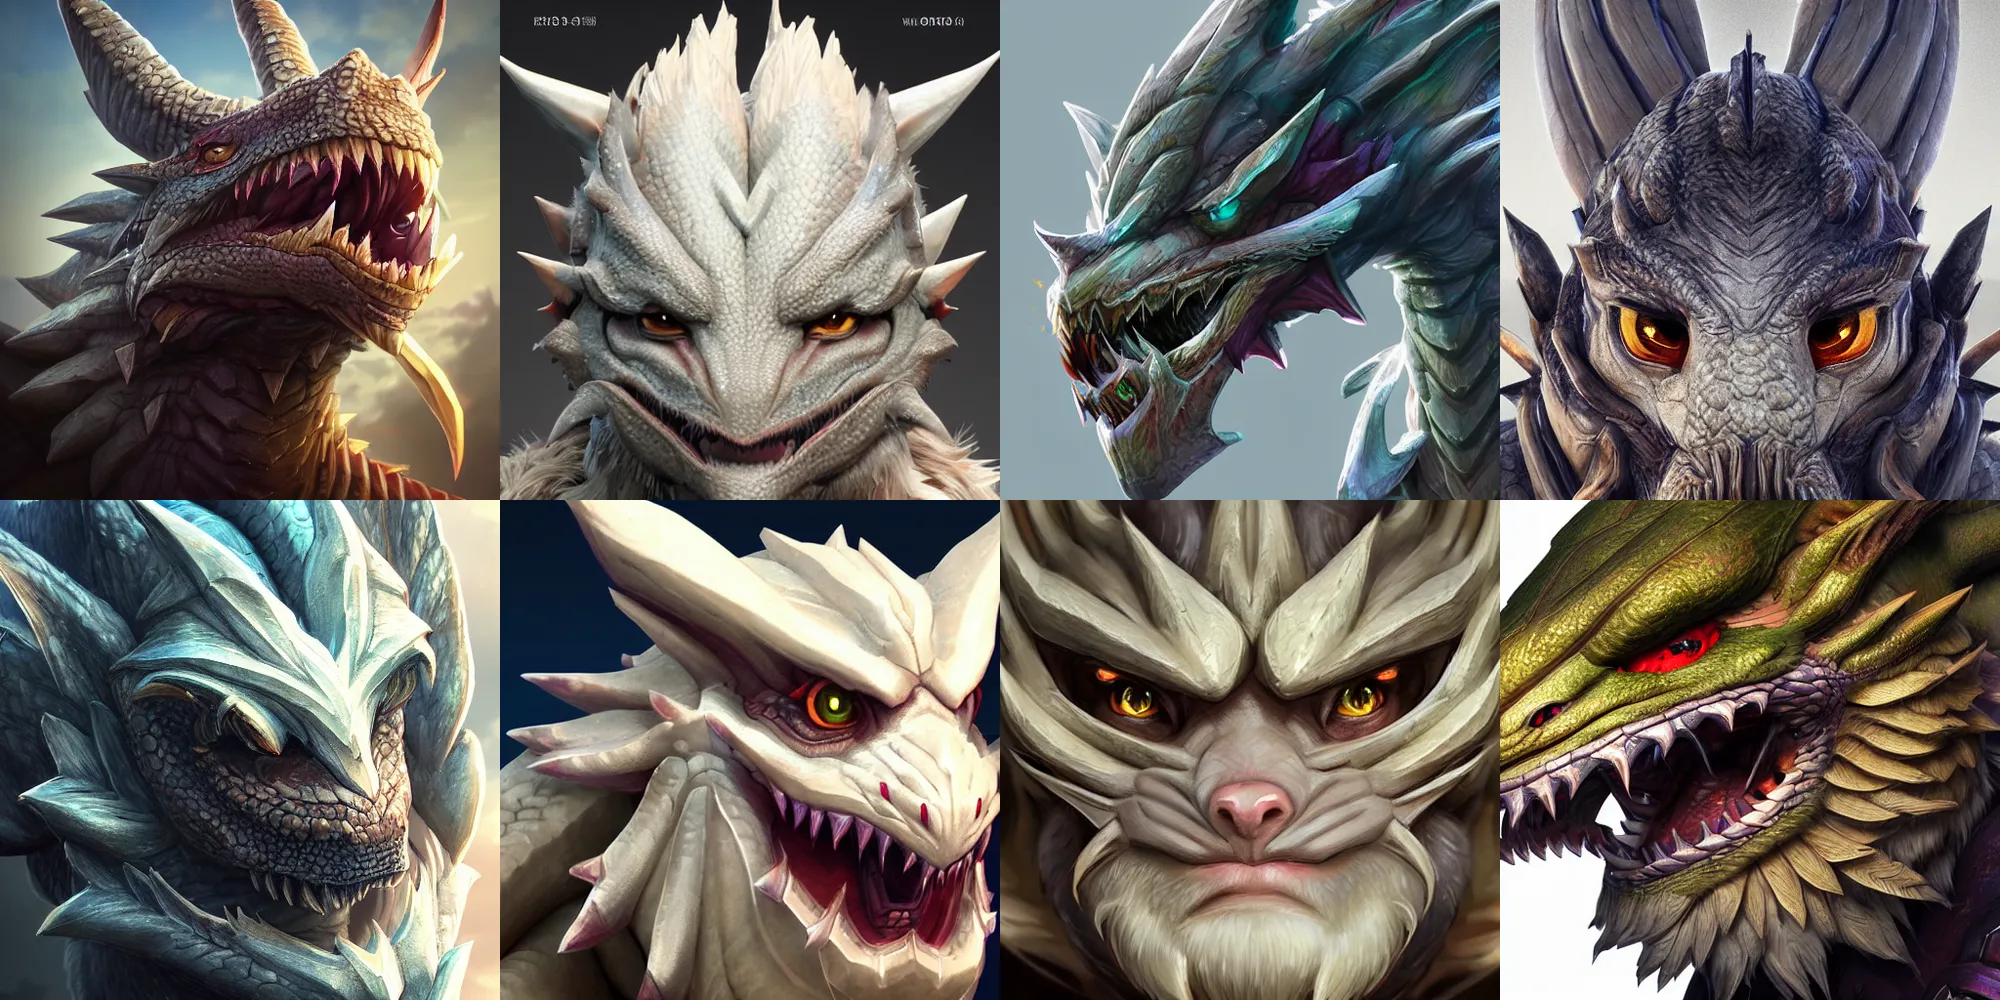 Prompt: close up headshot extremely detailed, 3d Dragon artwork character design by wlop, arvalis, George lucas, artgerm, in the style of League of legends, ARK survival, Skyrim HD, Breath of the wild, amazing artwork on artstation high detail, detailed feathers, textures, scales and fur, 3d render